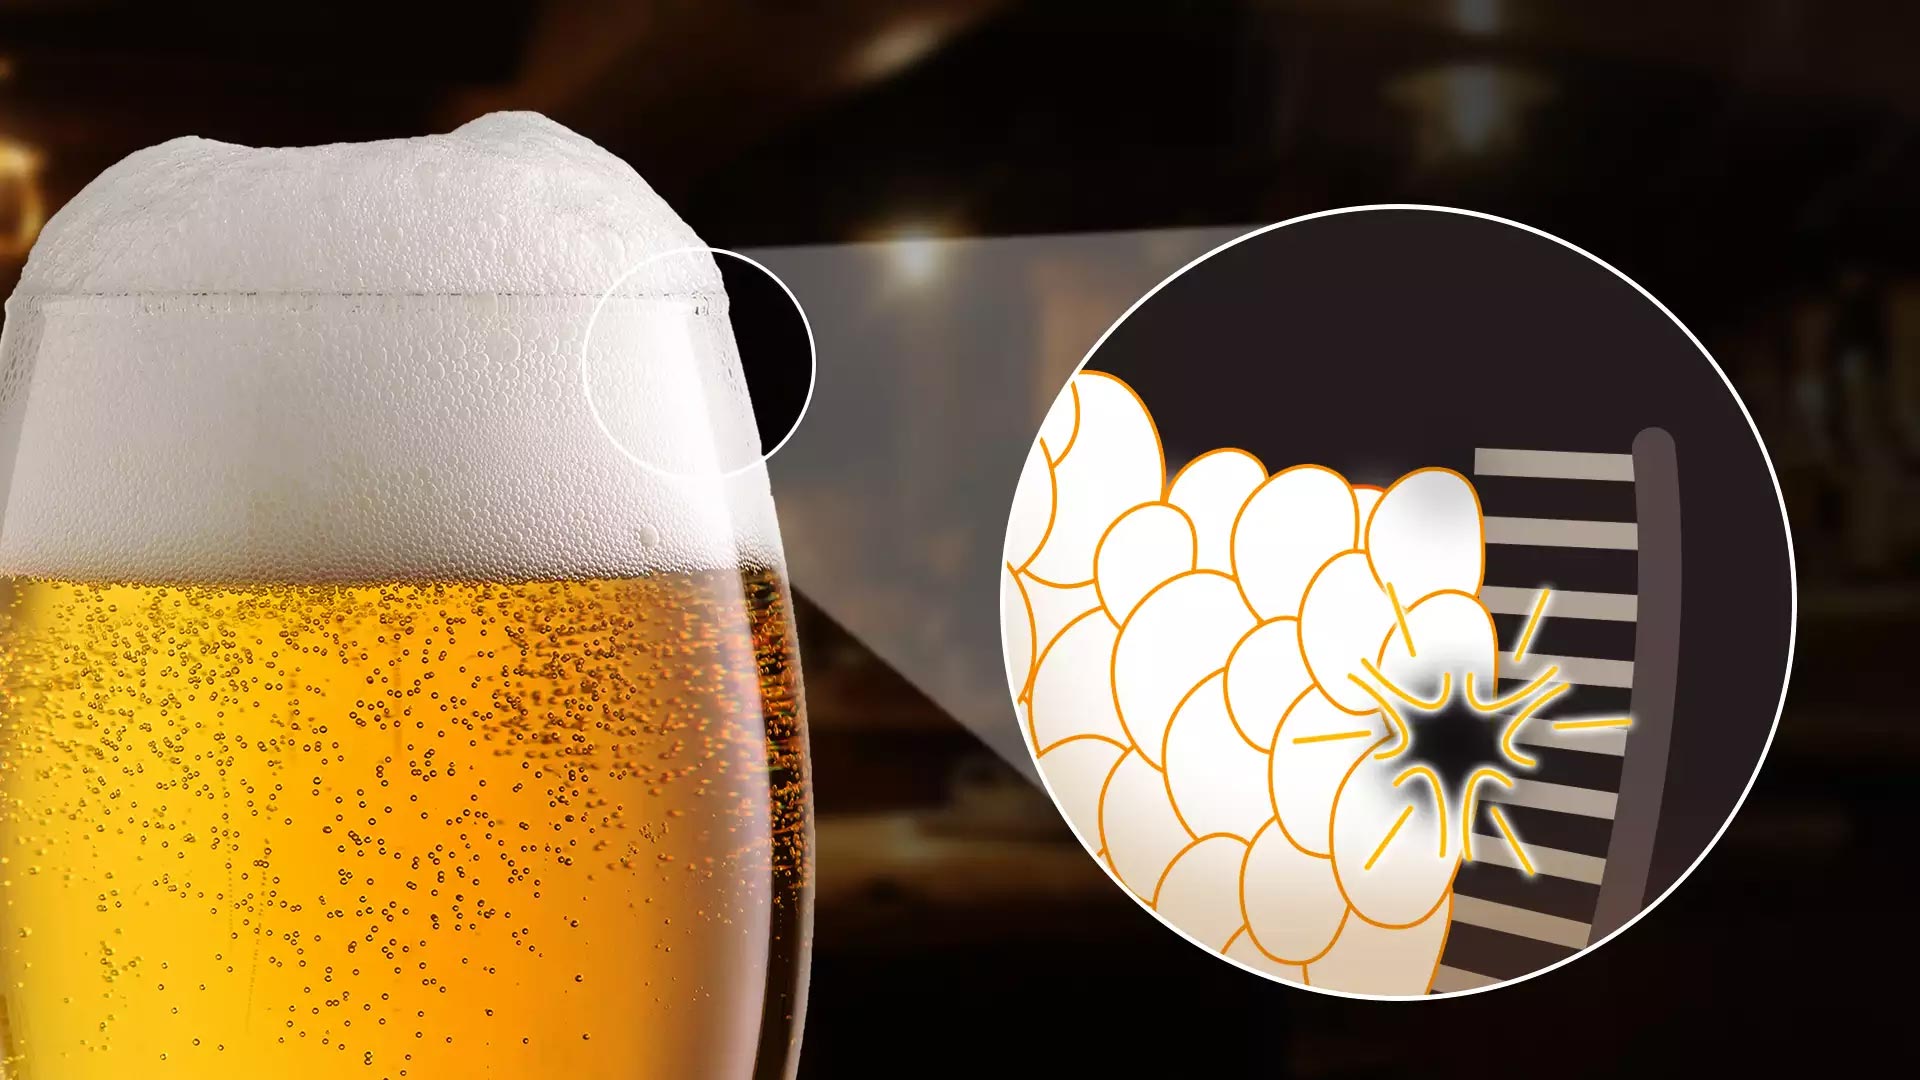 https://scitechdaily.com/images/Superamphiphobic-Surface-Coating-on-Beer-Glass.jpg